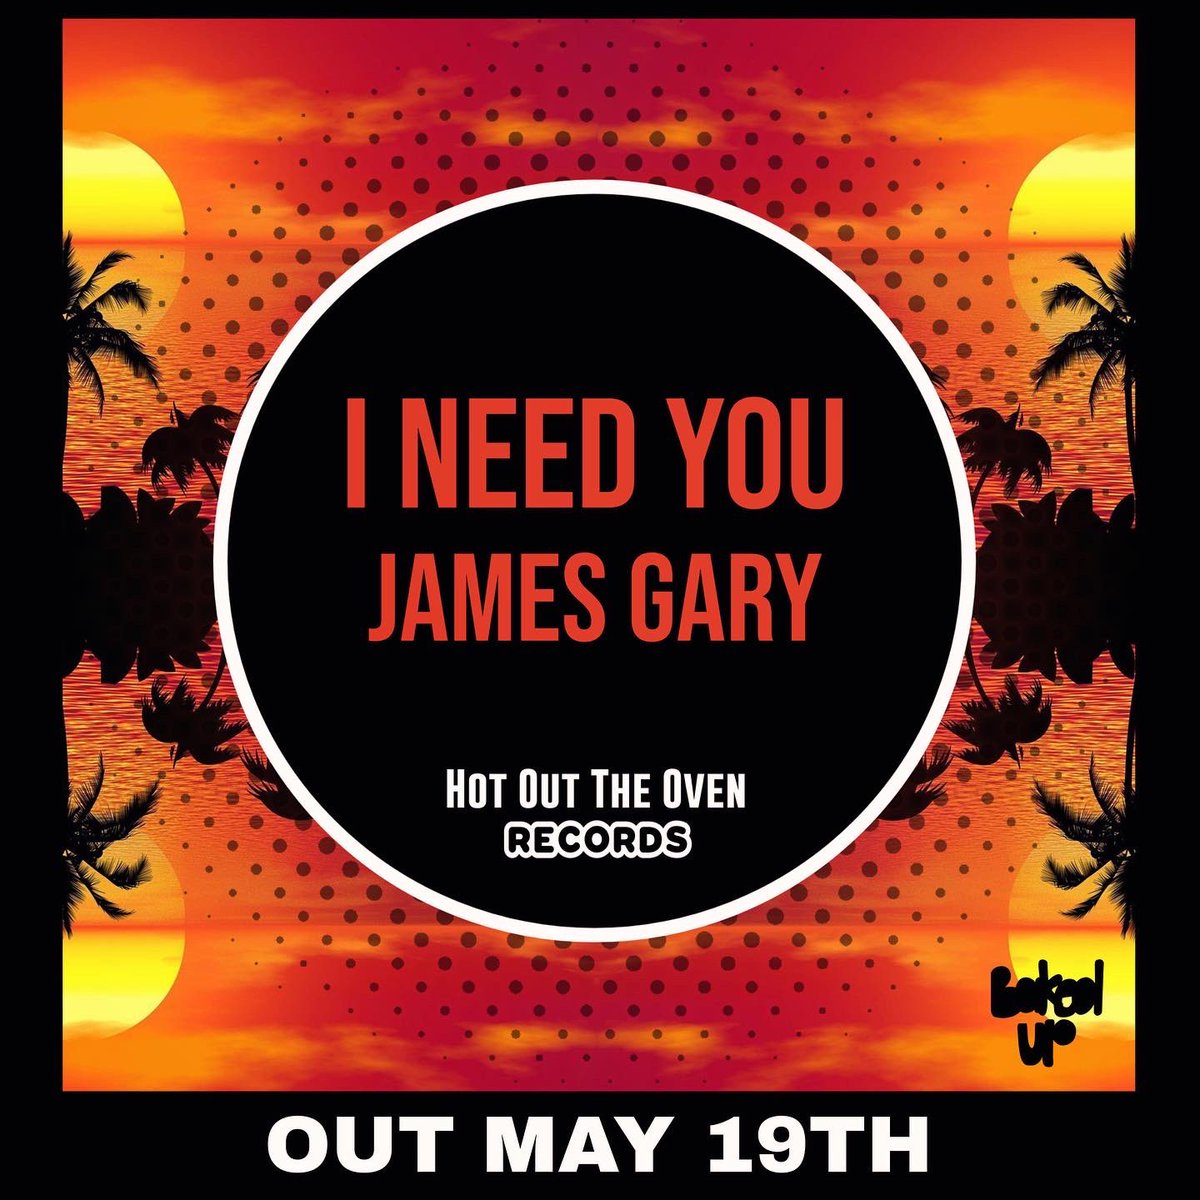 PS - peep our new song announcement for  @bakedup_records  Excited to release “I Need You” by our  @bakedupmgmt_ artist  @JamesGaryMusic 5/19  You guys are going to love this progressive house track, it’s perfect for summer 